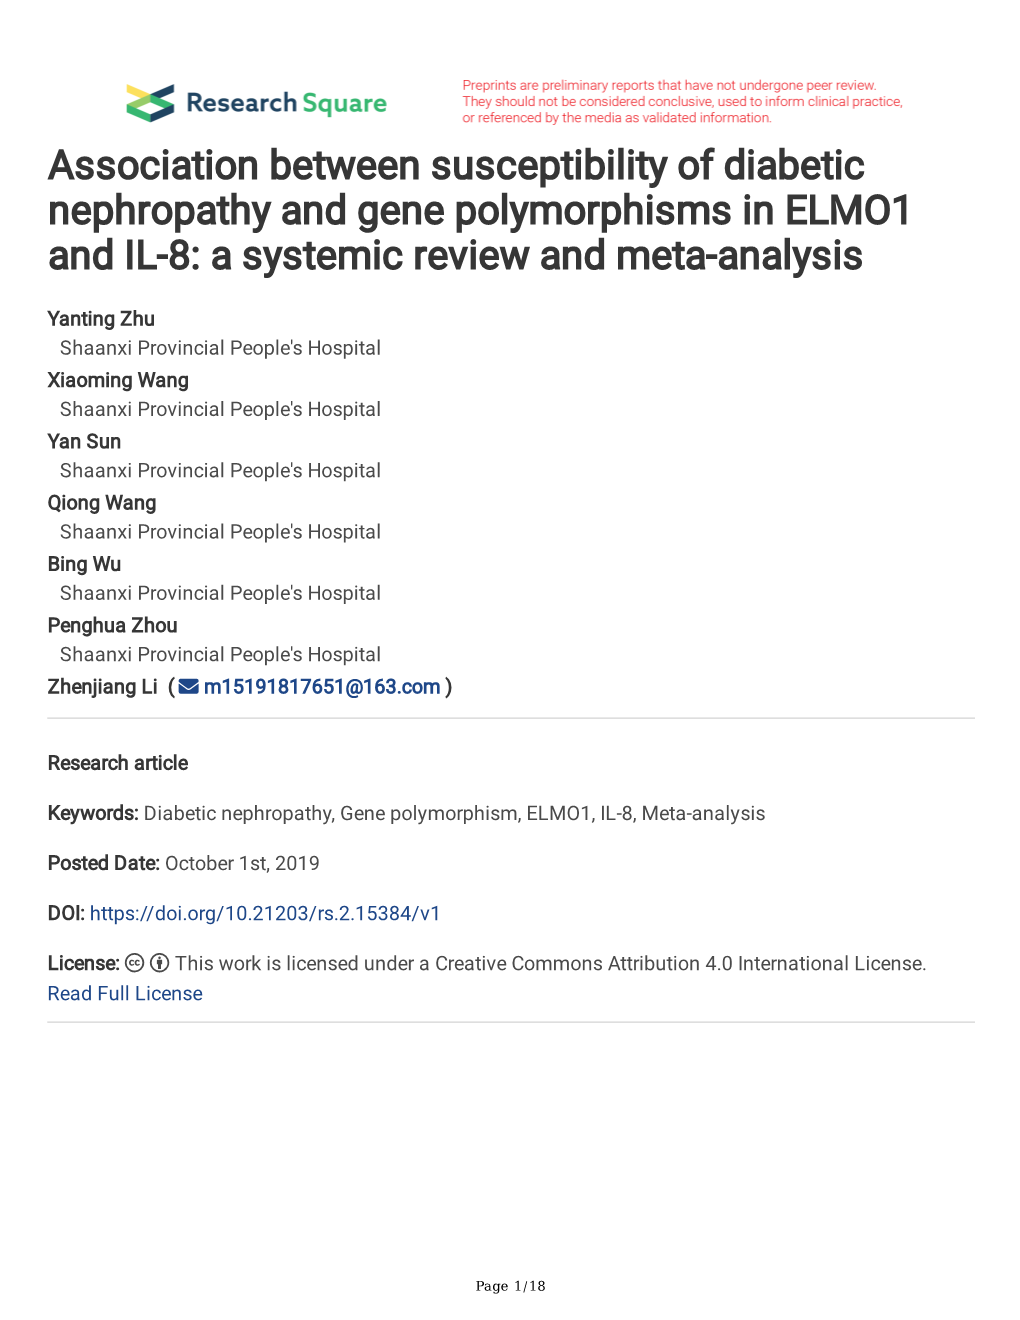 Association Between Susceptibility of Diabetic Nephropathy and Gene Polymorphisms in ELMO1 and IL-8: a Systemic Review and Meta-Analysis